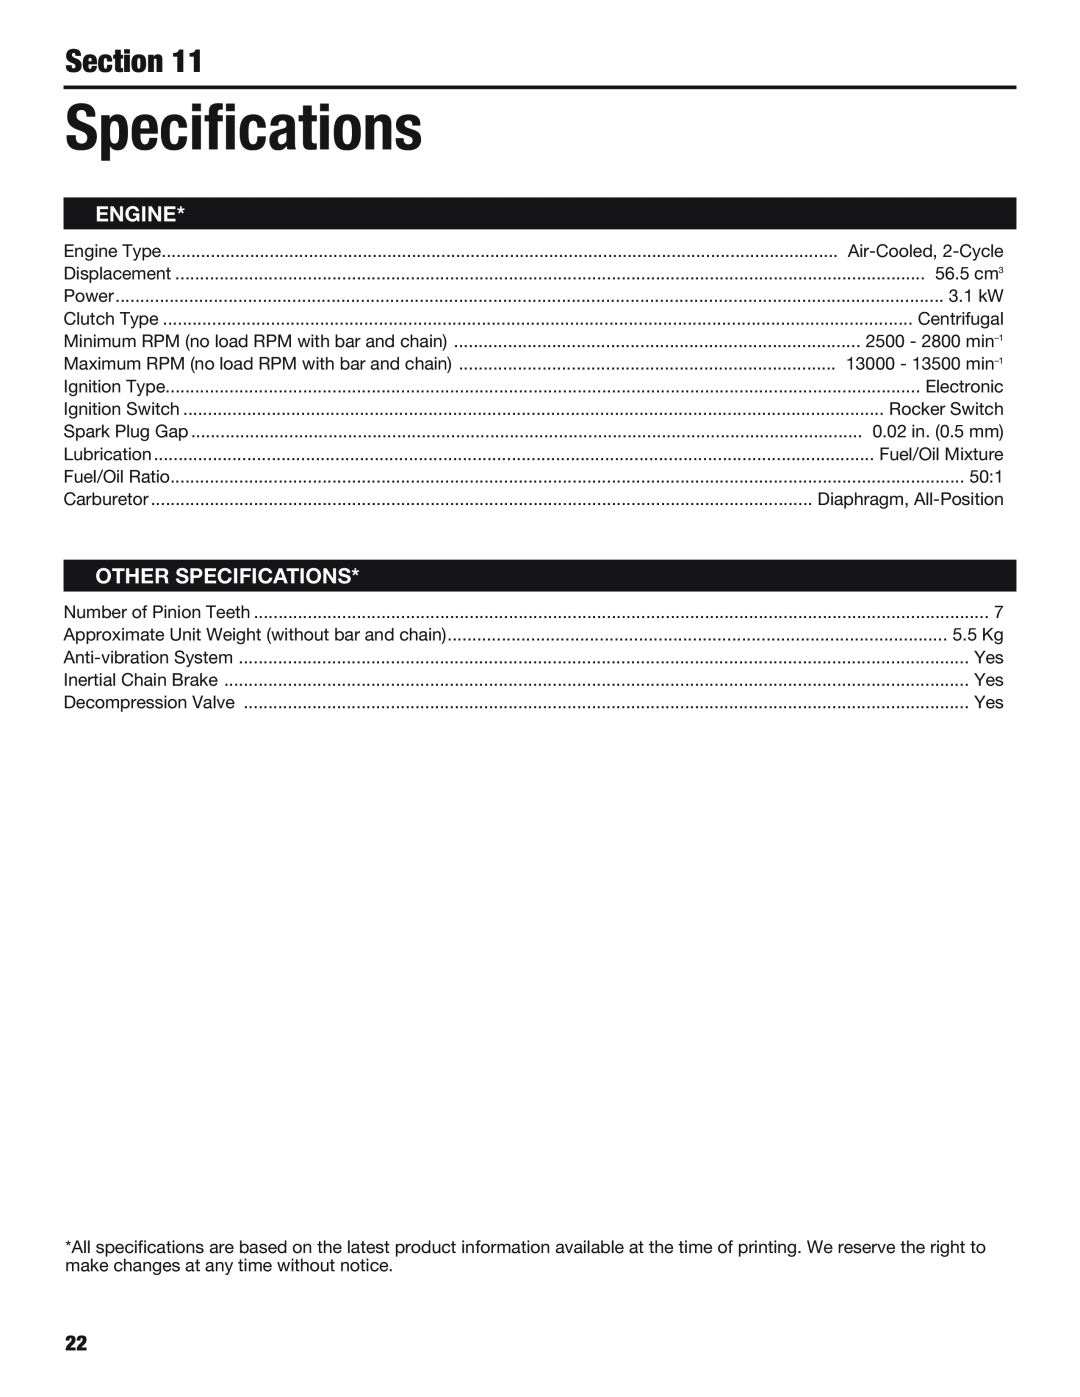 Cub Cadet CS5720 manual Section, Engine, Other Specifications 